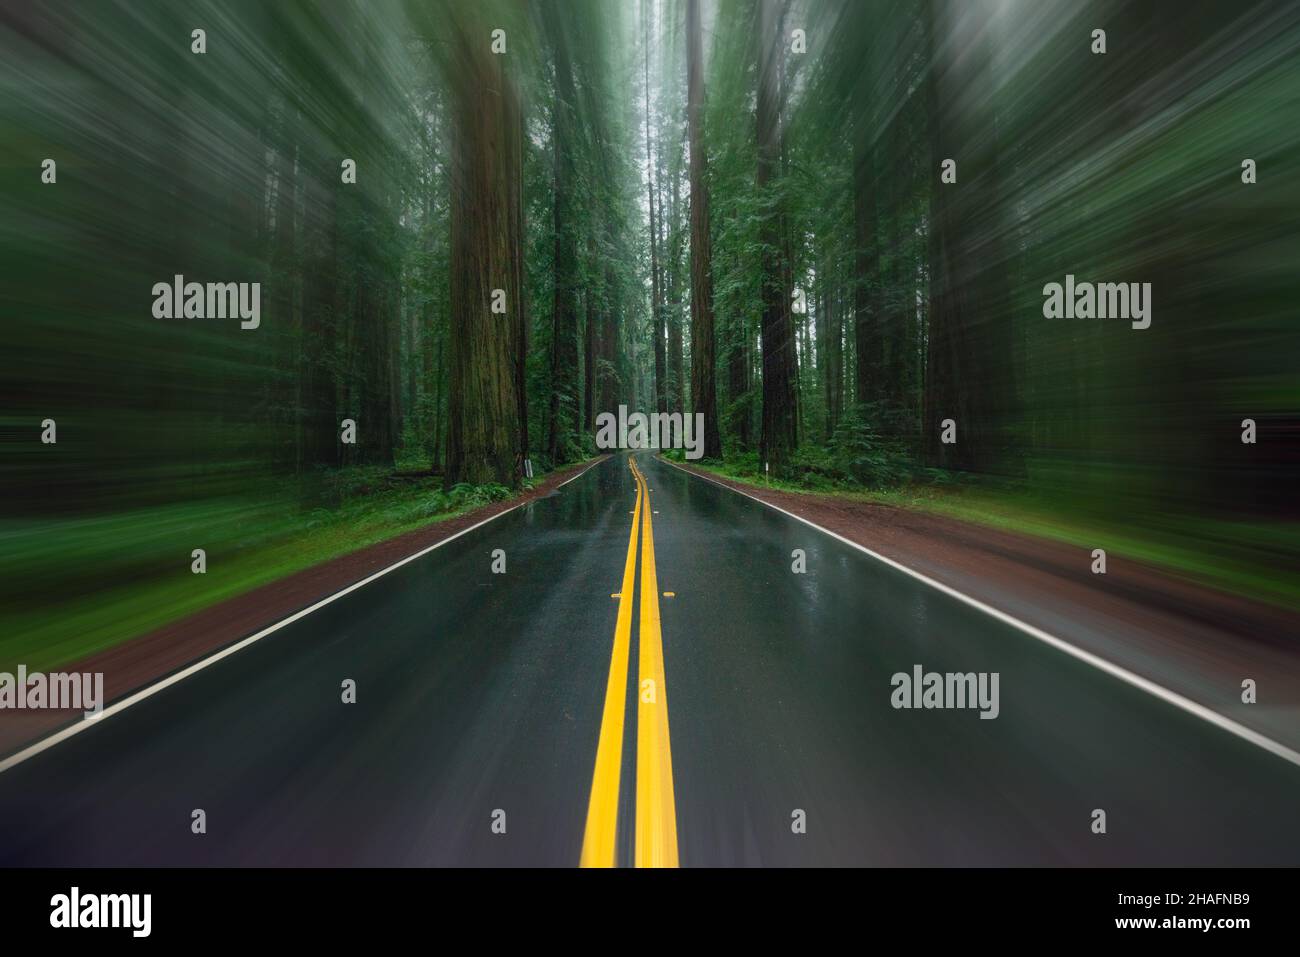 Selective blur wet road with yellow lines through redwood forest. Stock Photo